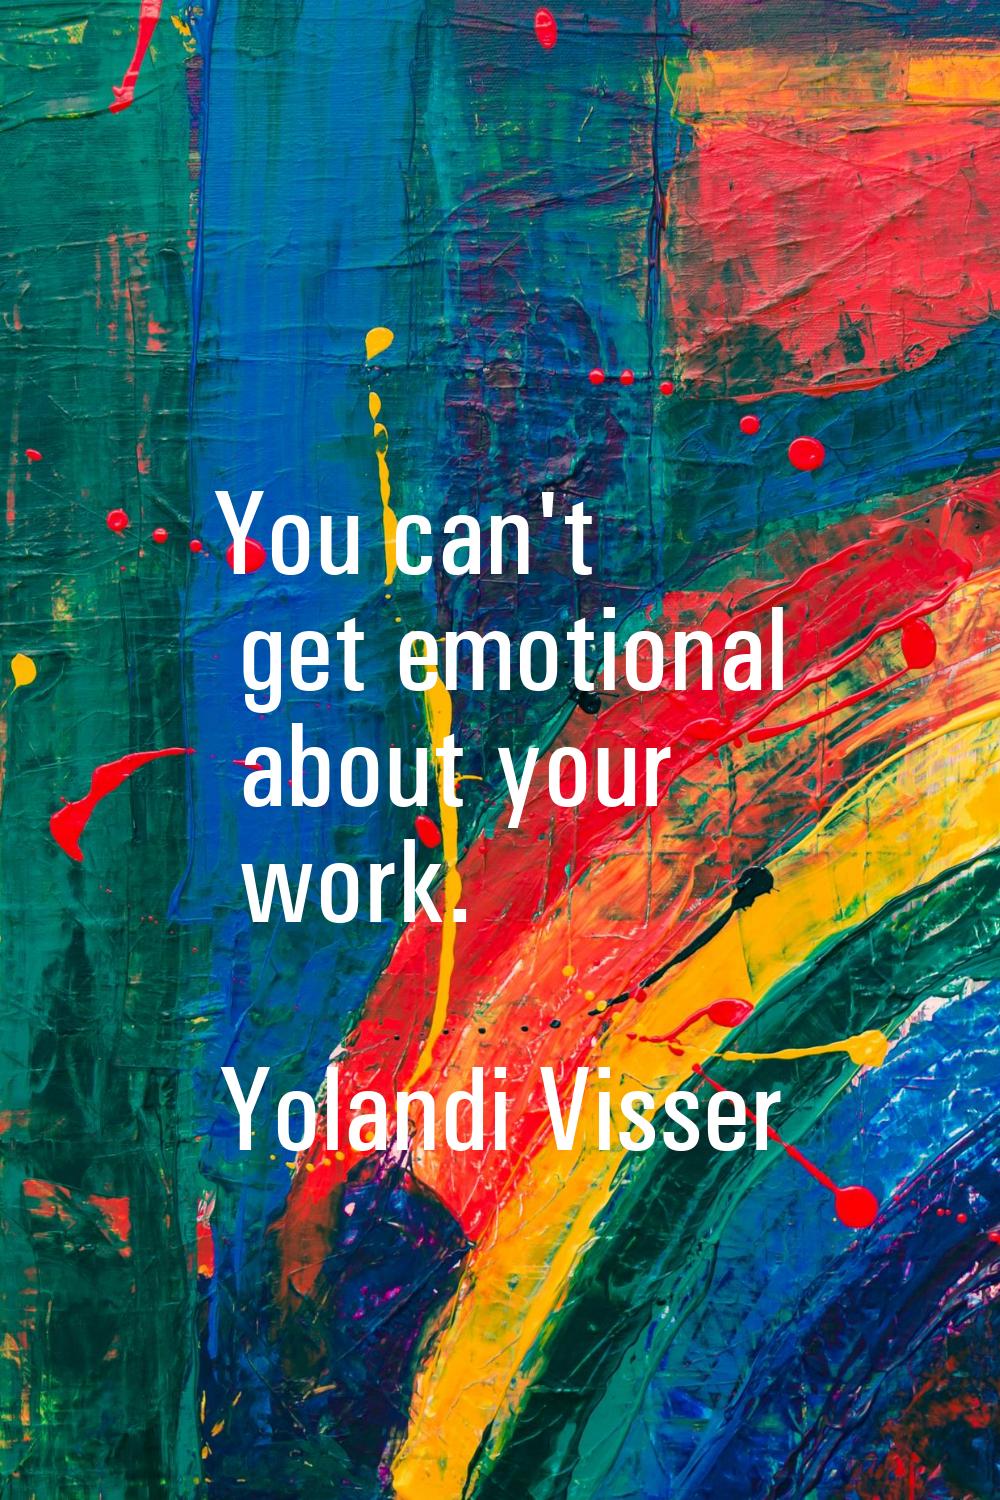 You can't get emotional about your work.